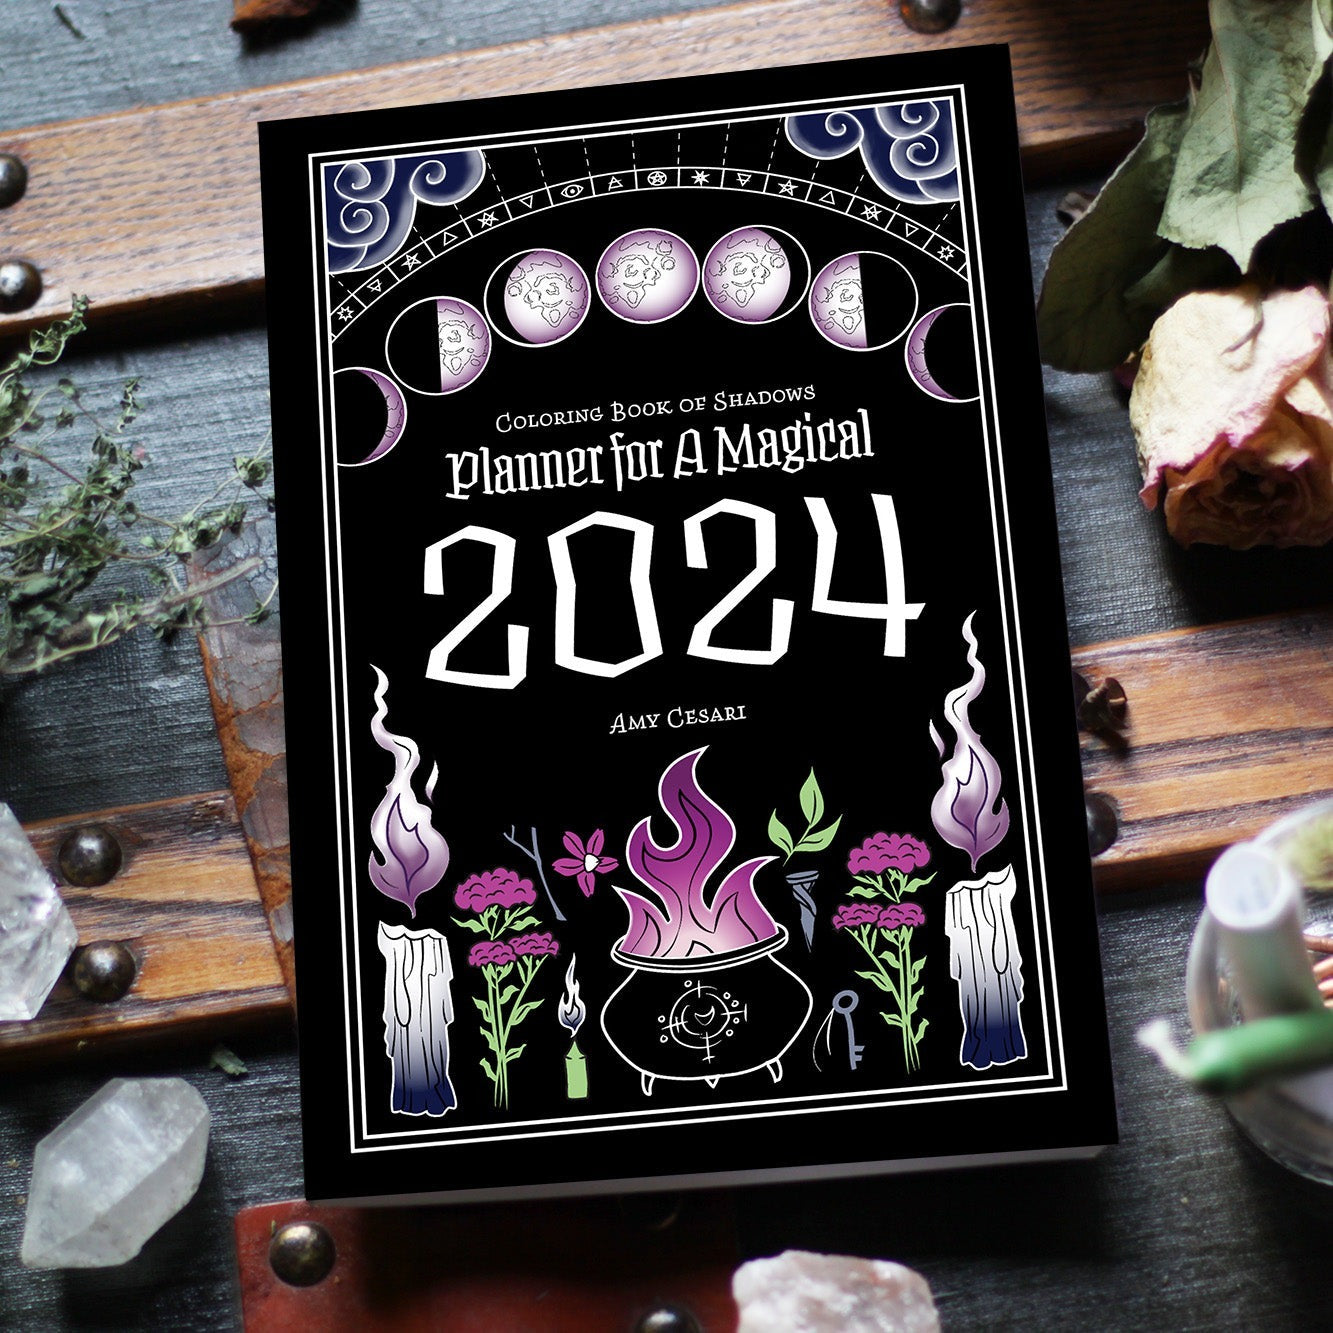 FULL COLOR PLANNER FOR A MAGICAL 2024